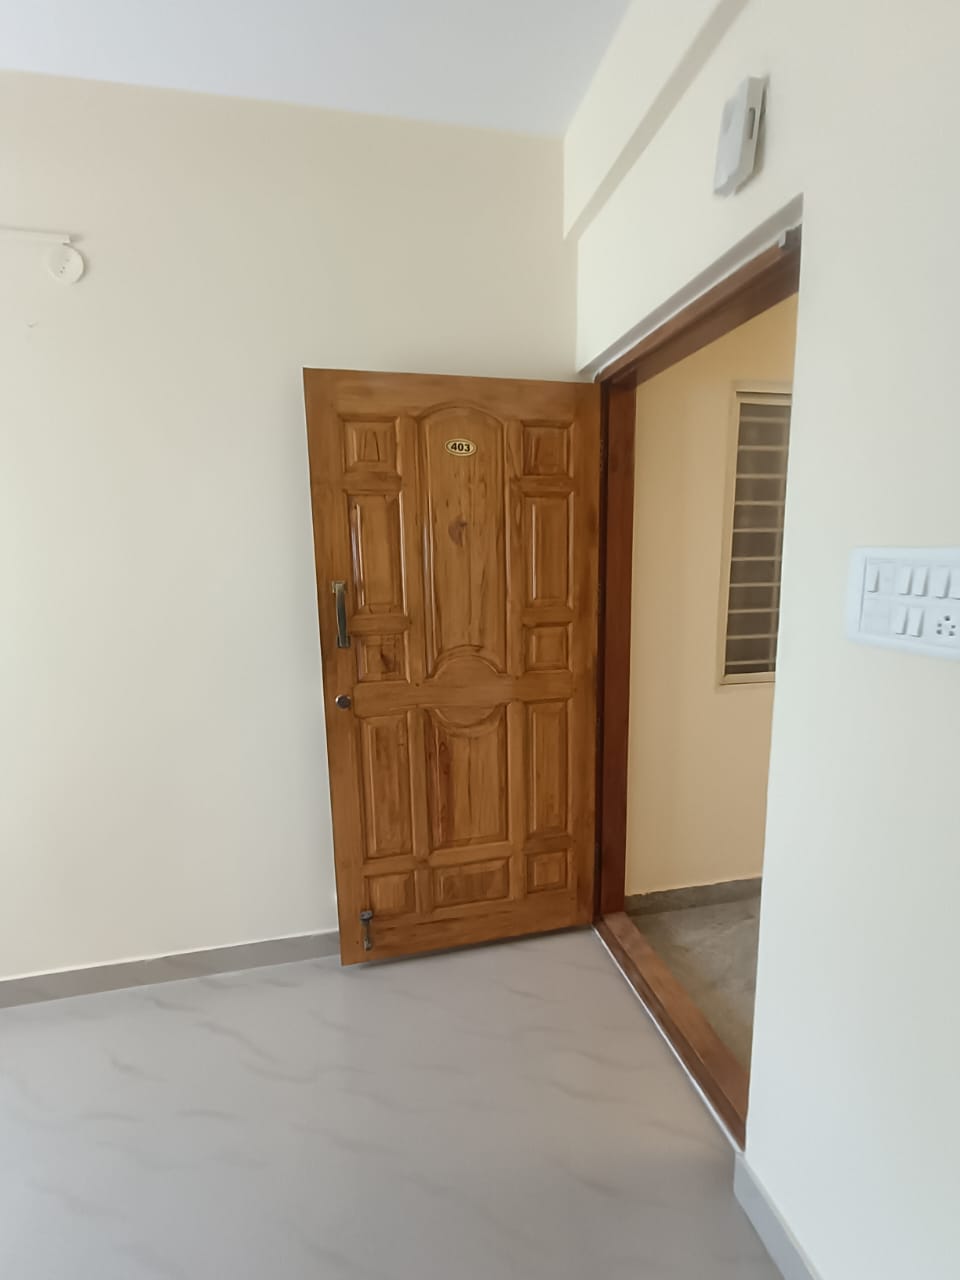 2 BHK Residential Apartment for Lease Only at JAML2 - 3569-17lakh in JP Nagar 7th Phase